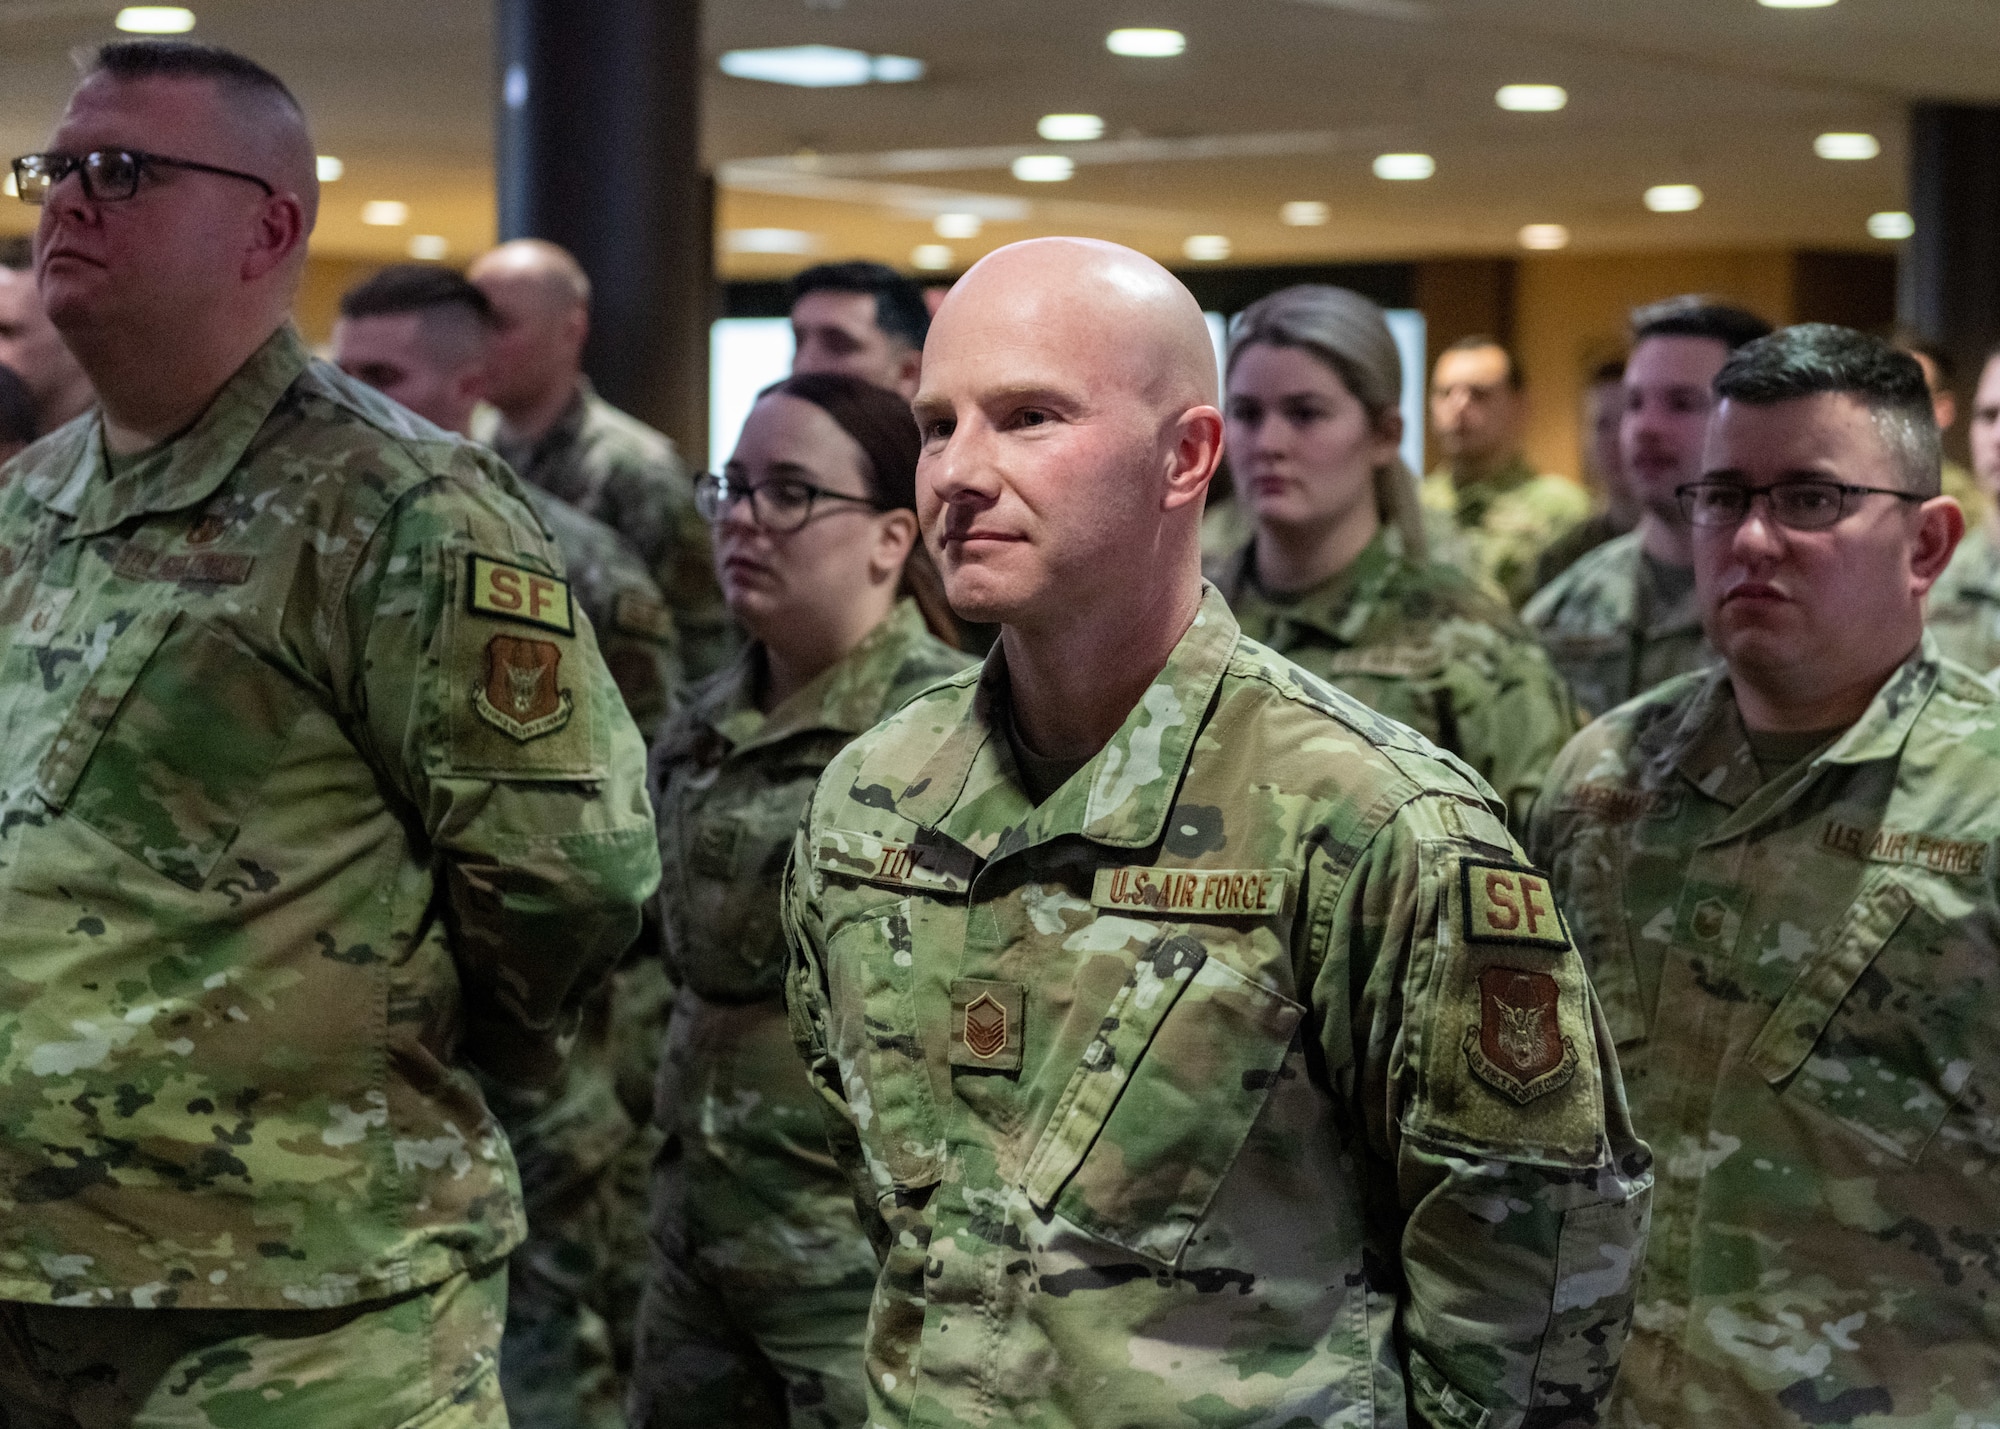 Defenders assigned to the 910th Security Forces Squadron watch their unit’s change of command ceremony, Feb. 4, 2023, at Youngstown Air Reserve Station, Ohio. During the ceremony, Maj. Nicholas Megyesi transferred command to Capt. Robert Reader.